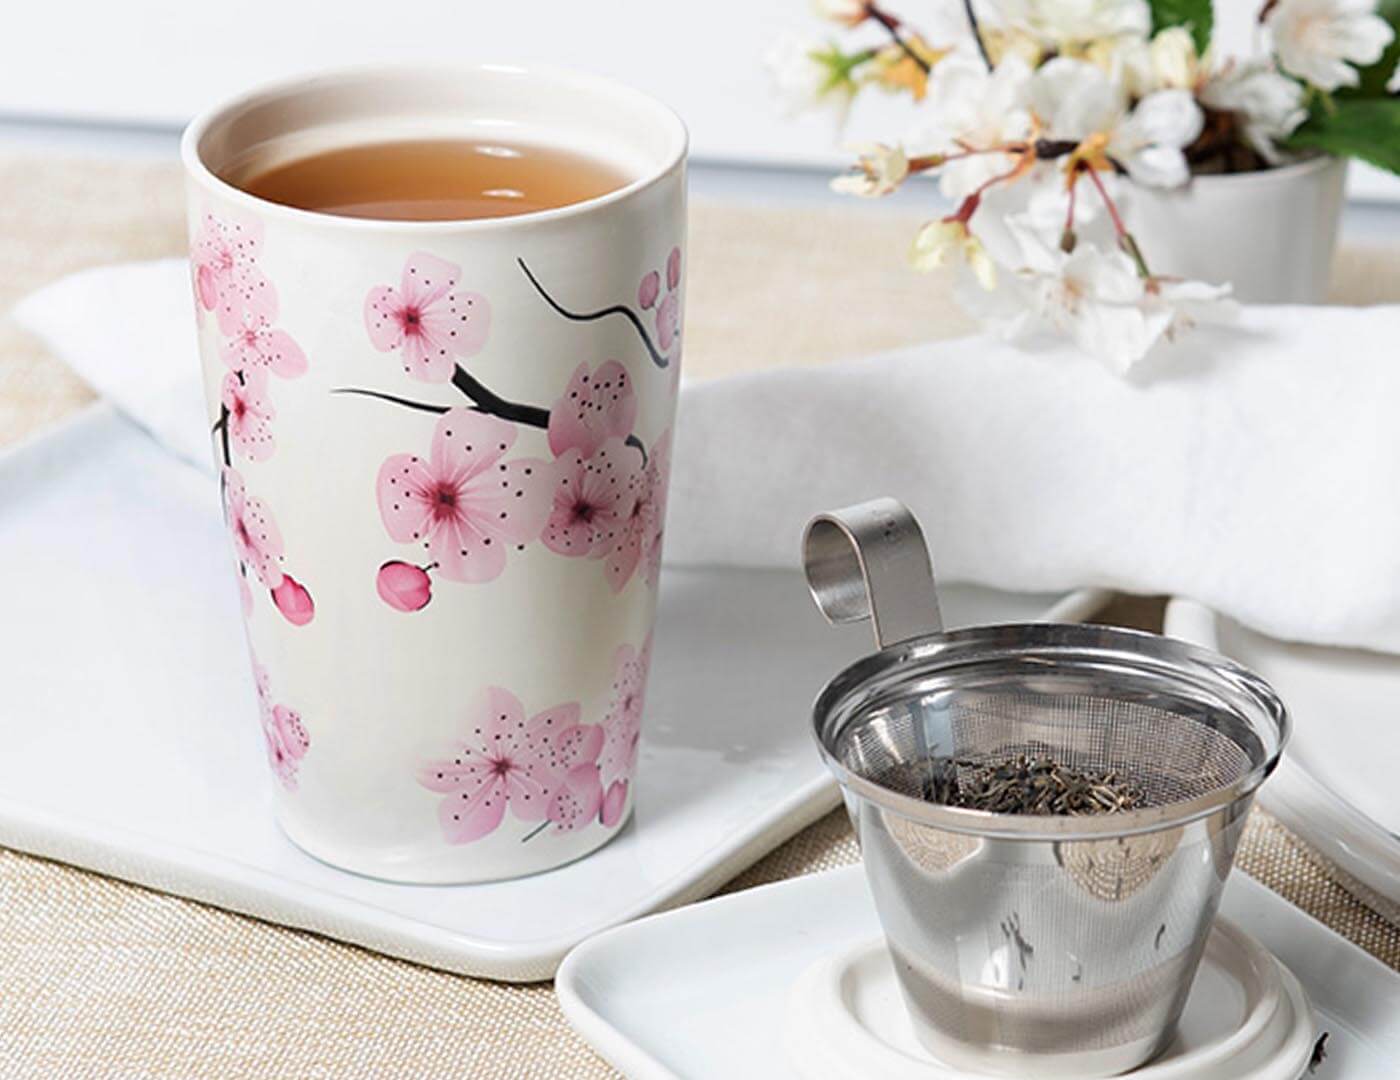 Hanami design KATI® Steeping cup with infuser showing cup on table